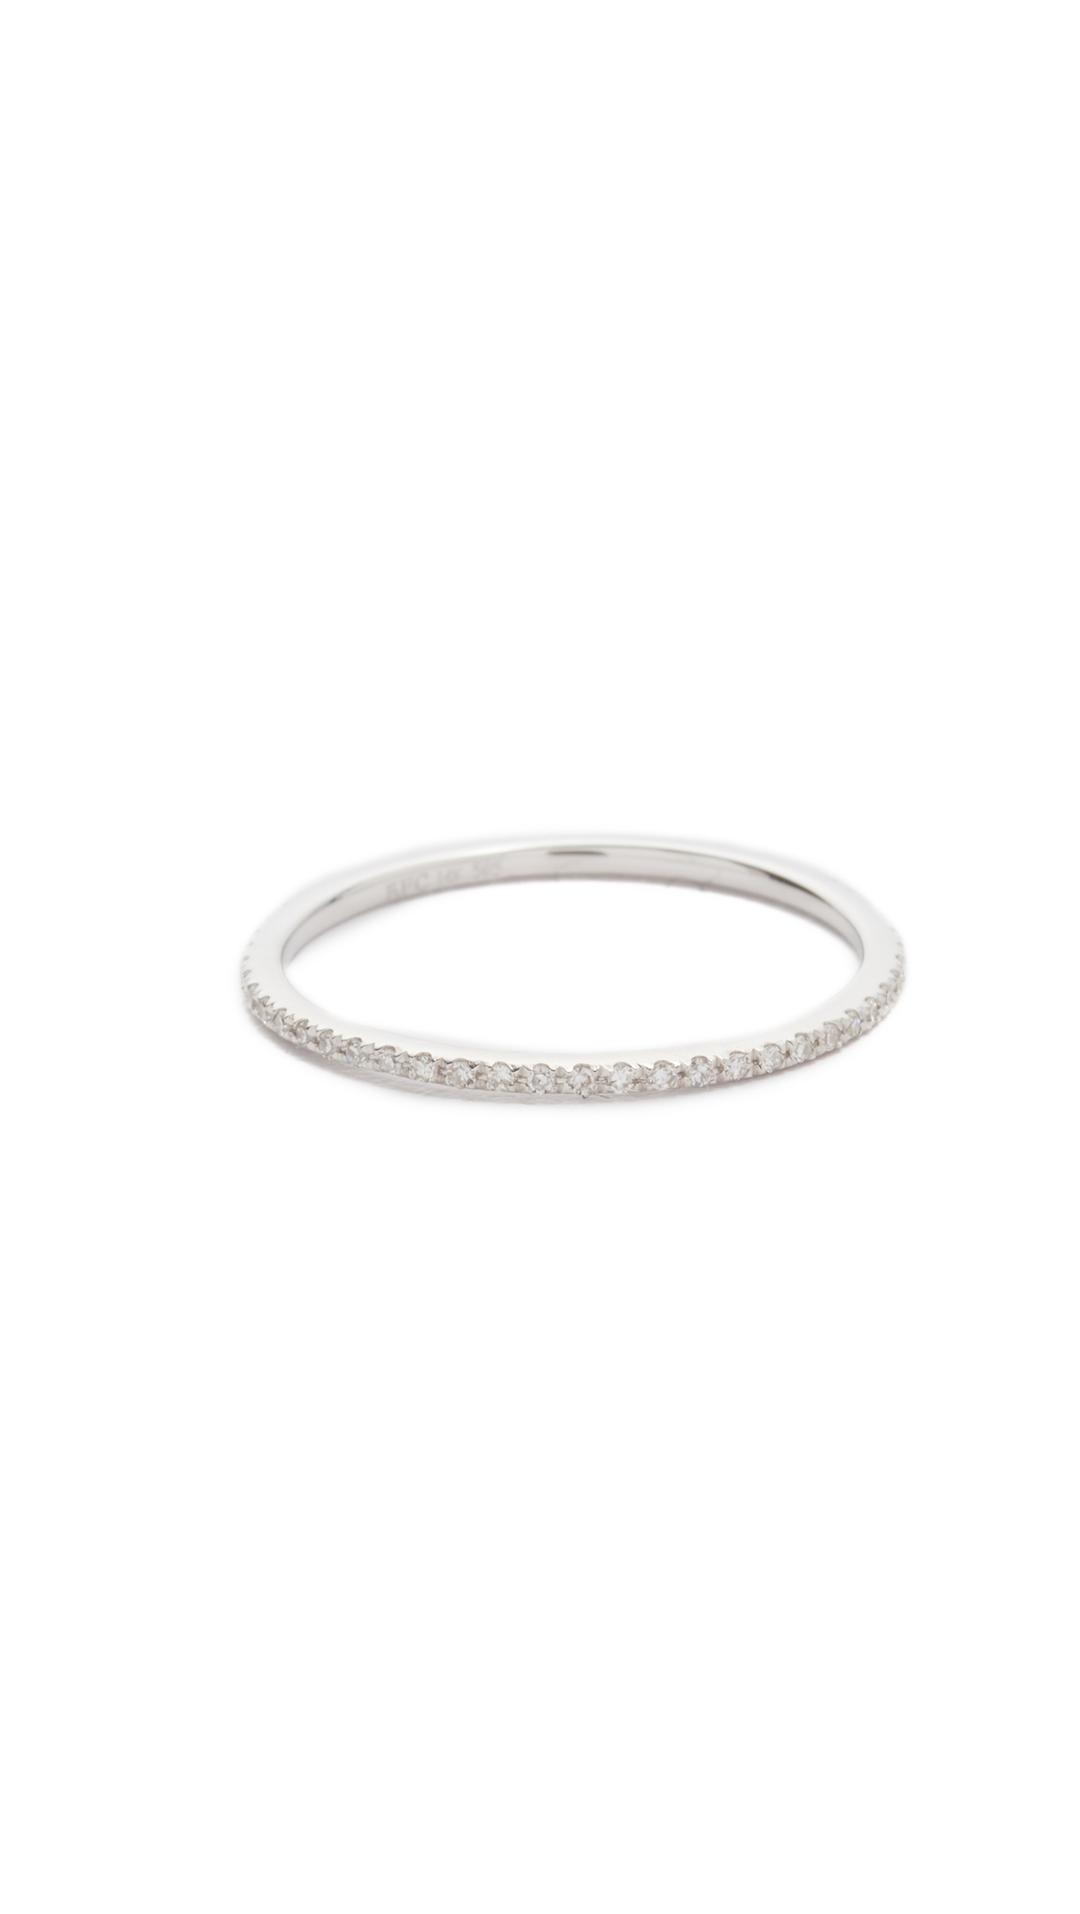 Stackable Diamond Rings for the Modern Bride | Who What Wear